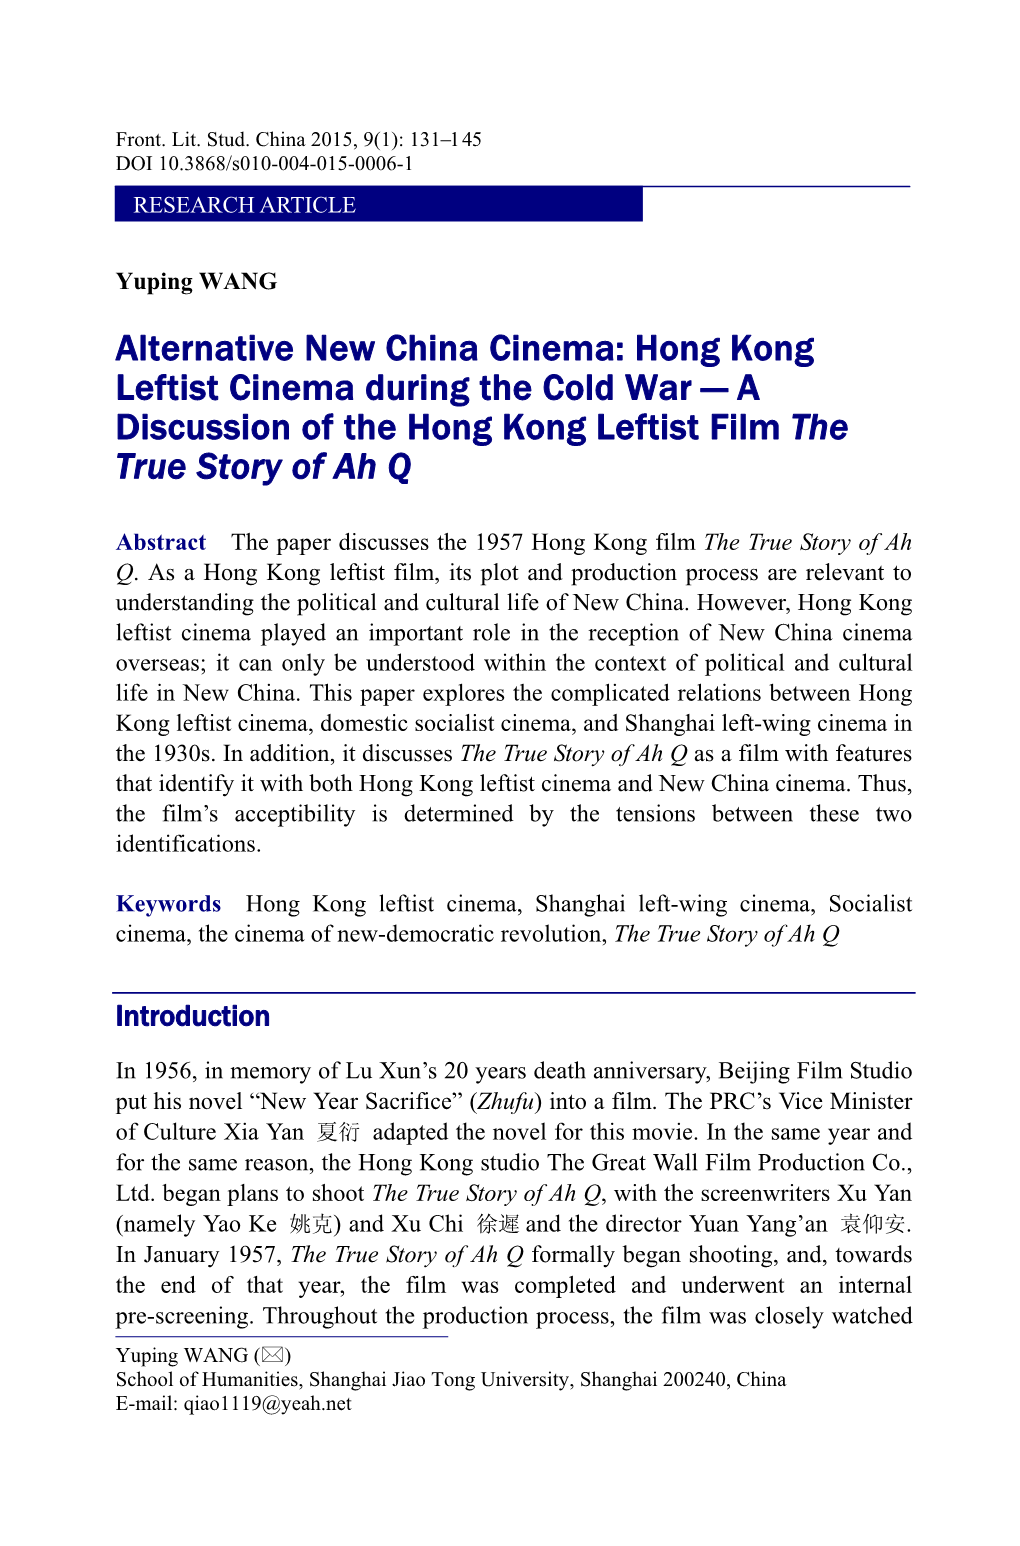 Hong Kong Leftist Cinema During the Cold War — a Discussion of the Hong Kong Leftist Film the True Story of Ah Q